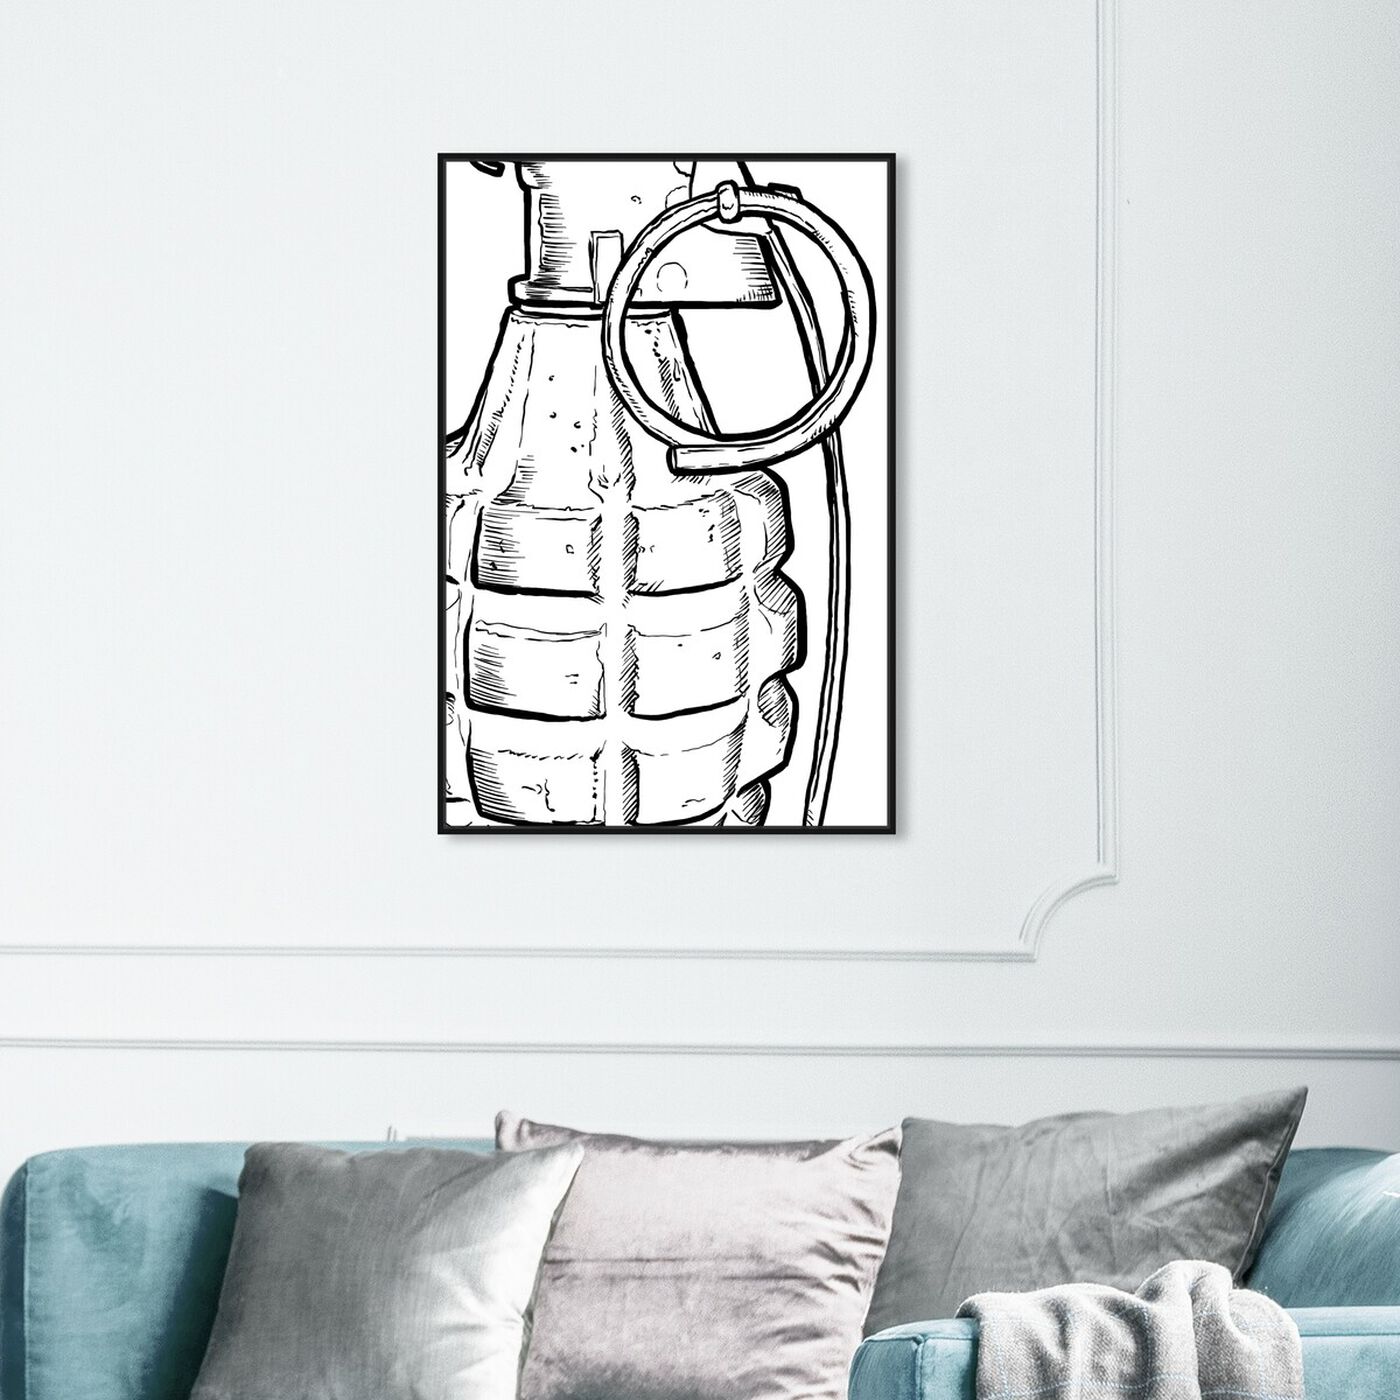 Hanging view of Grenade Pure featuring entertainment and hobbies and machine guns art.